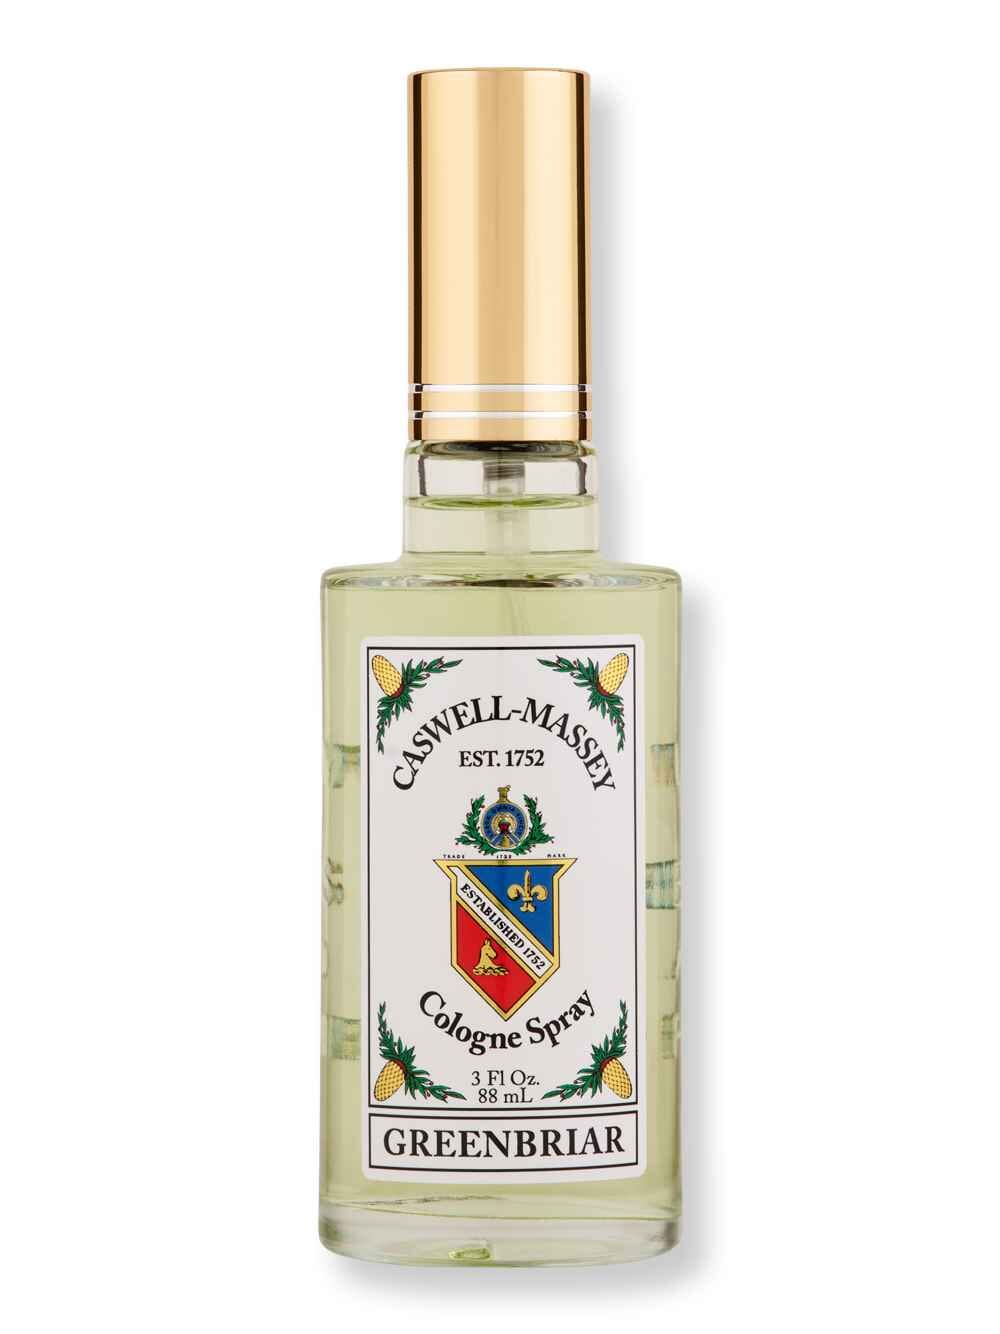 Caswell Massey Caswell Massey Greenbriar Cologne Perfumes & Colognes 